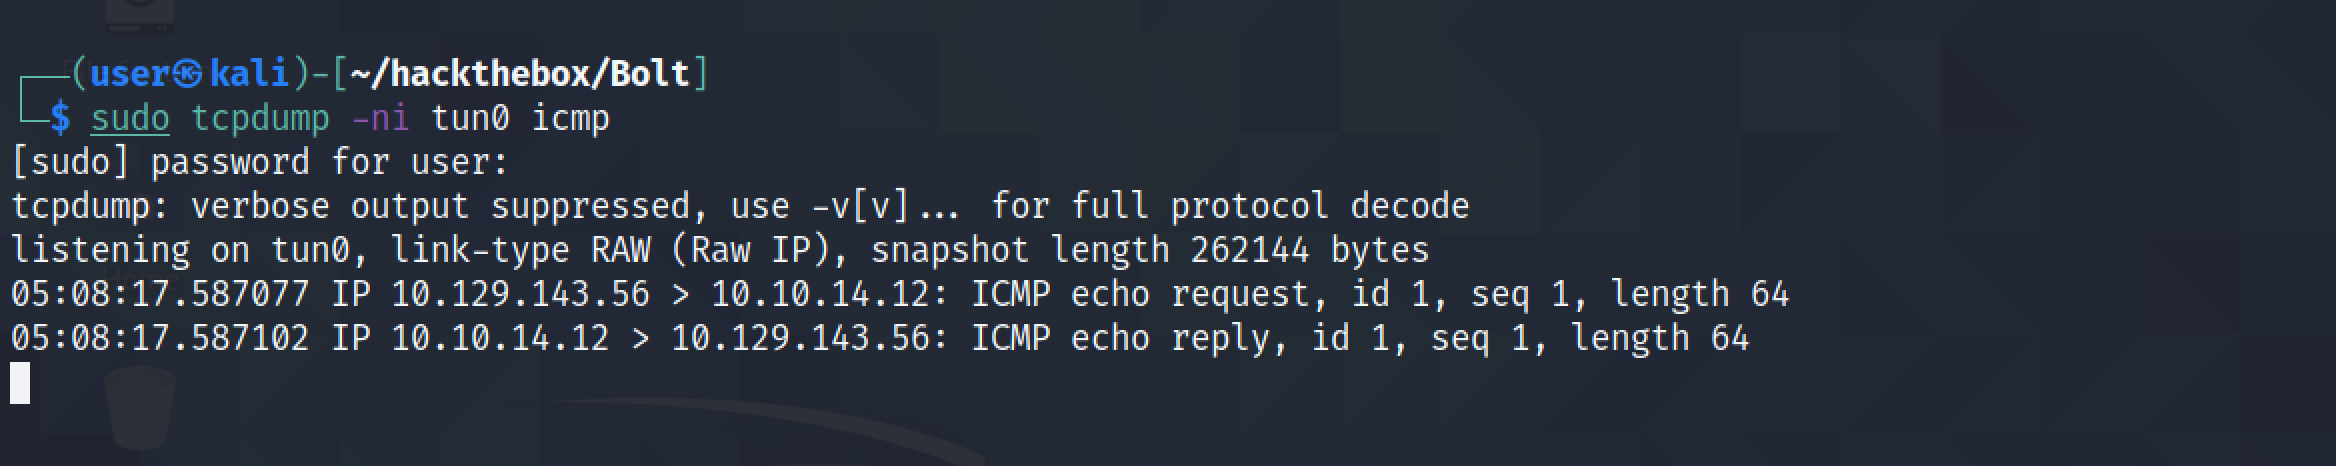 ICMP packets received on the local machine.